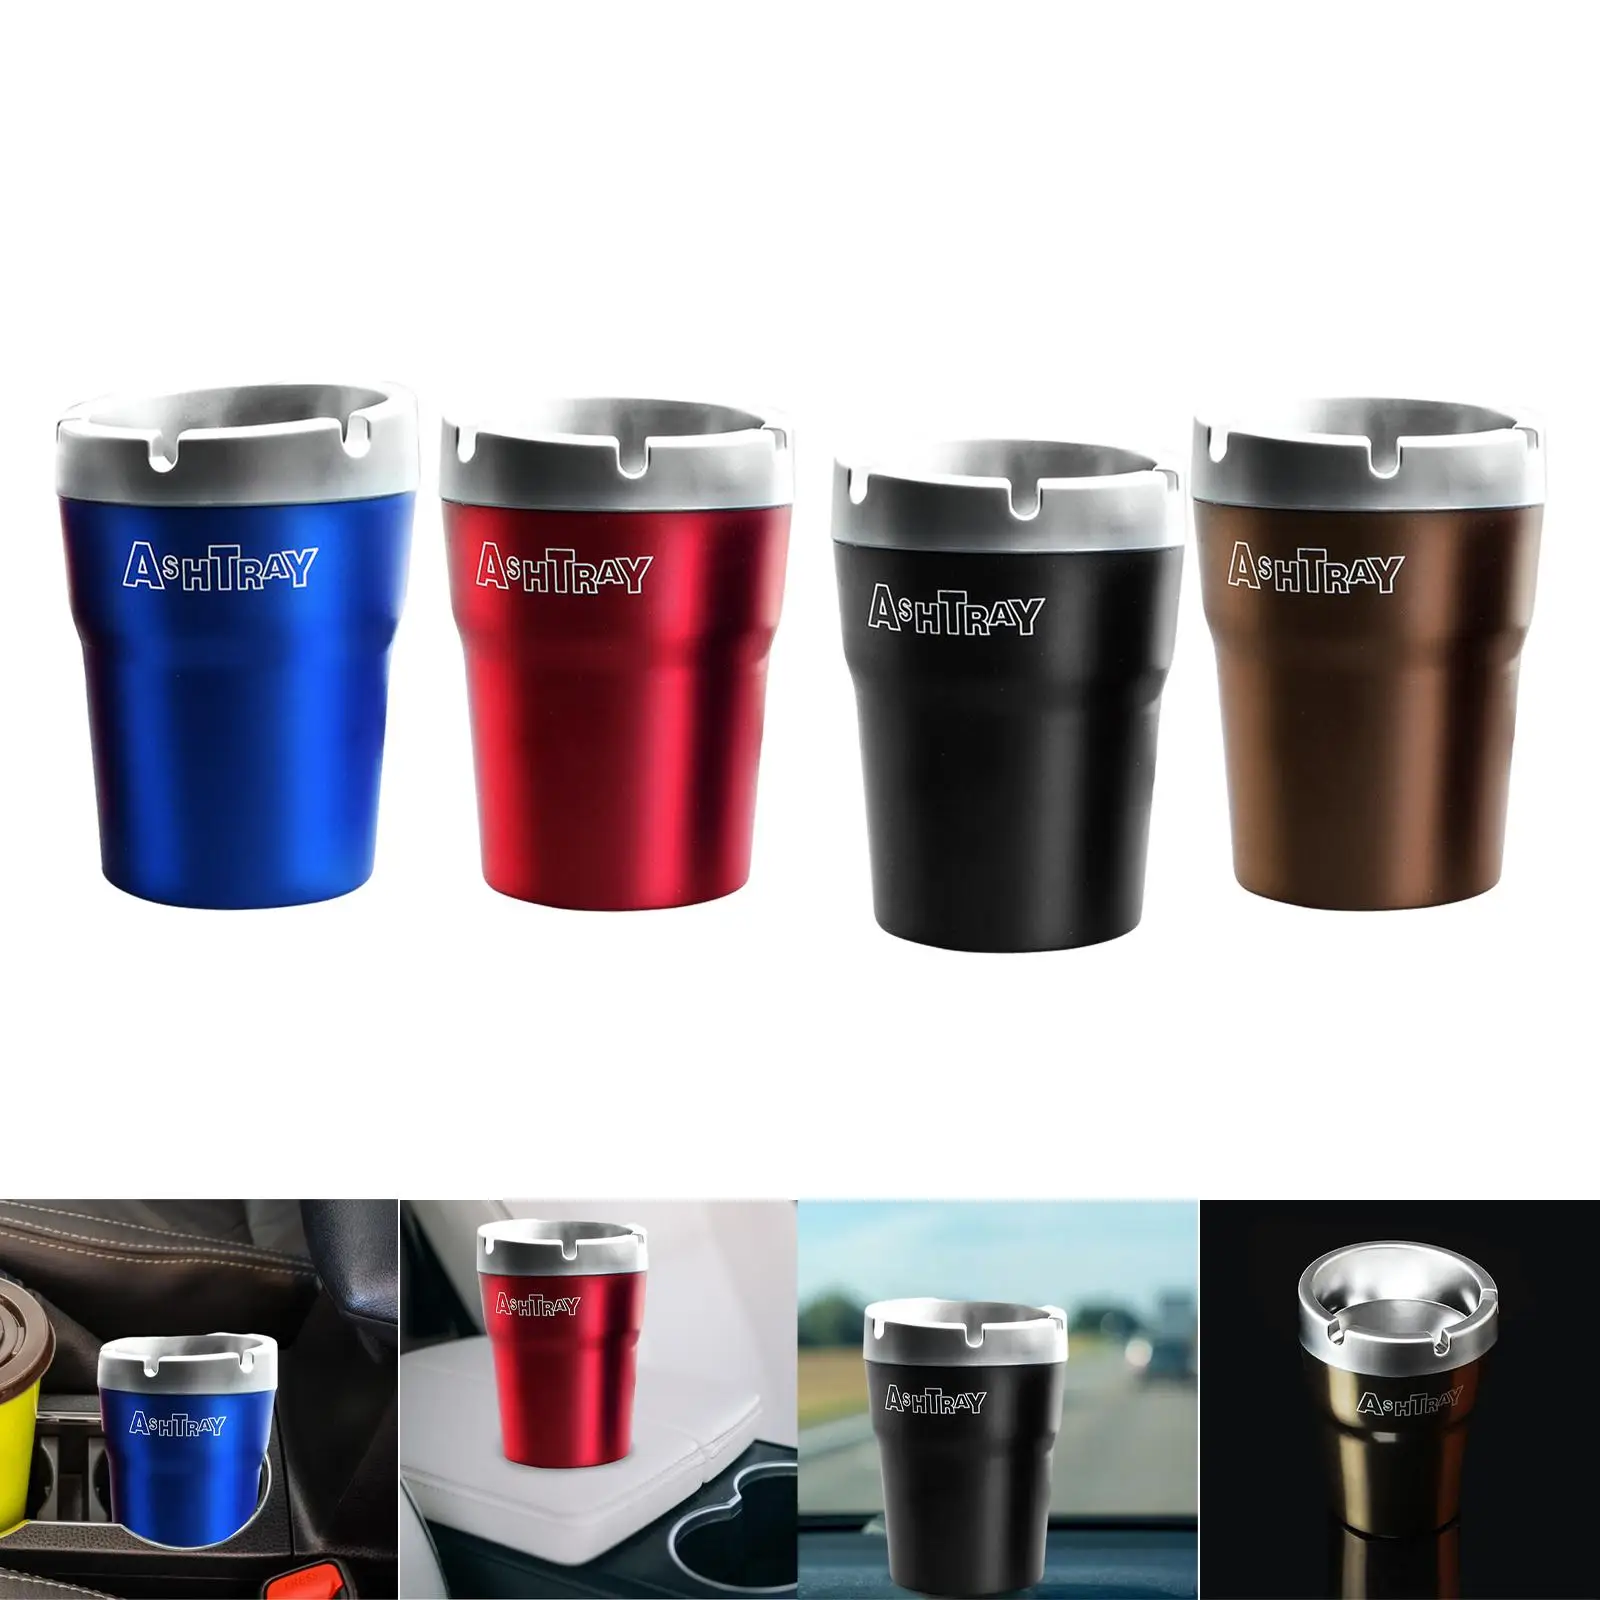 Portable Car Ashtray Cup Holder Smokeless Windproof Modern for Smoke Home Living Room